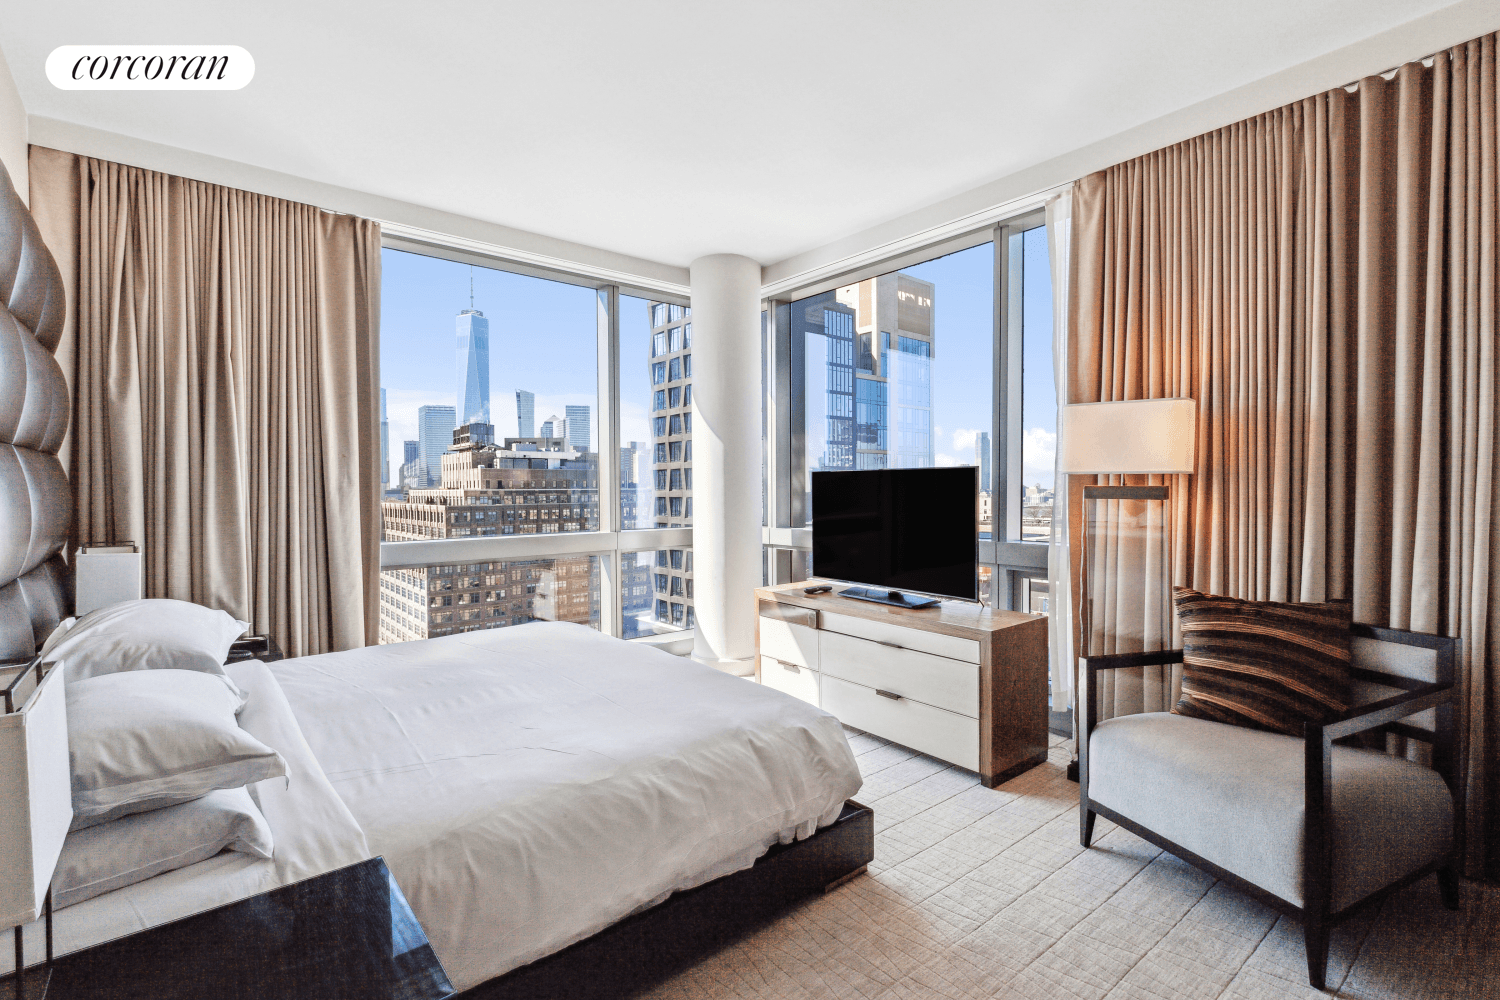 Exceptional Pied a Terre or Investment Opportunity in SoHo World Class Amenities Named Forbes Hotel with Best Views in NYCResidence 1905 at the luxurious Dominick Hotel is a fully furnished ...